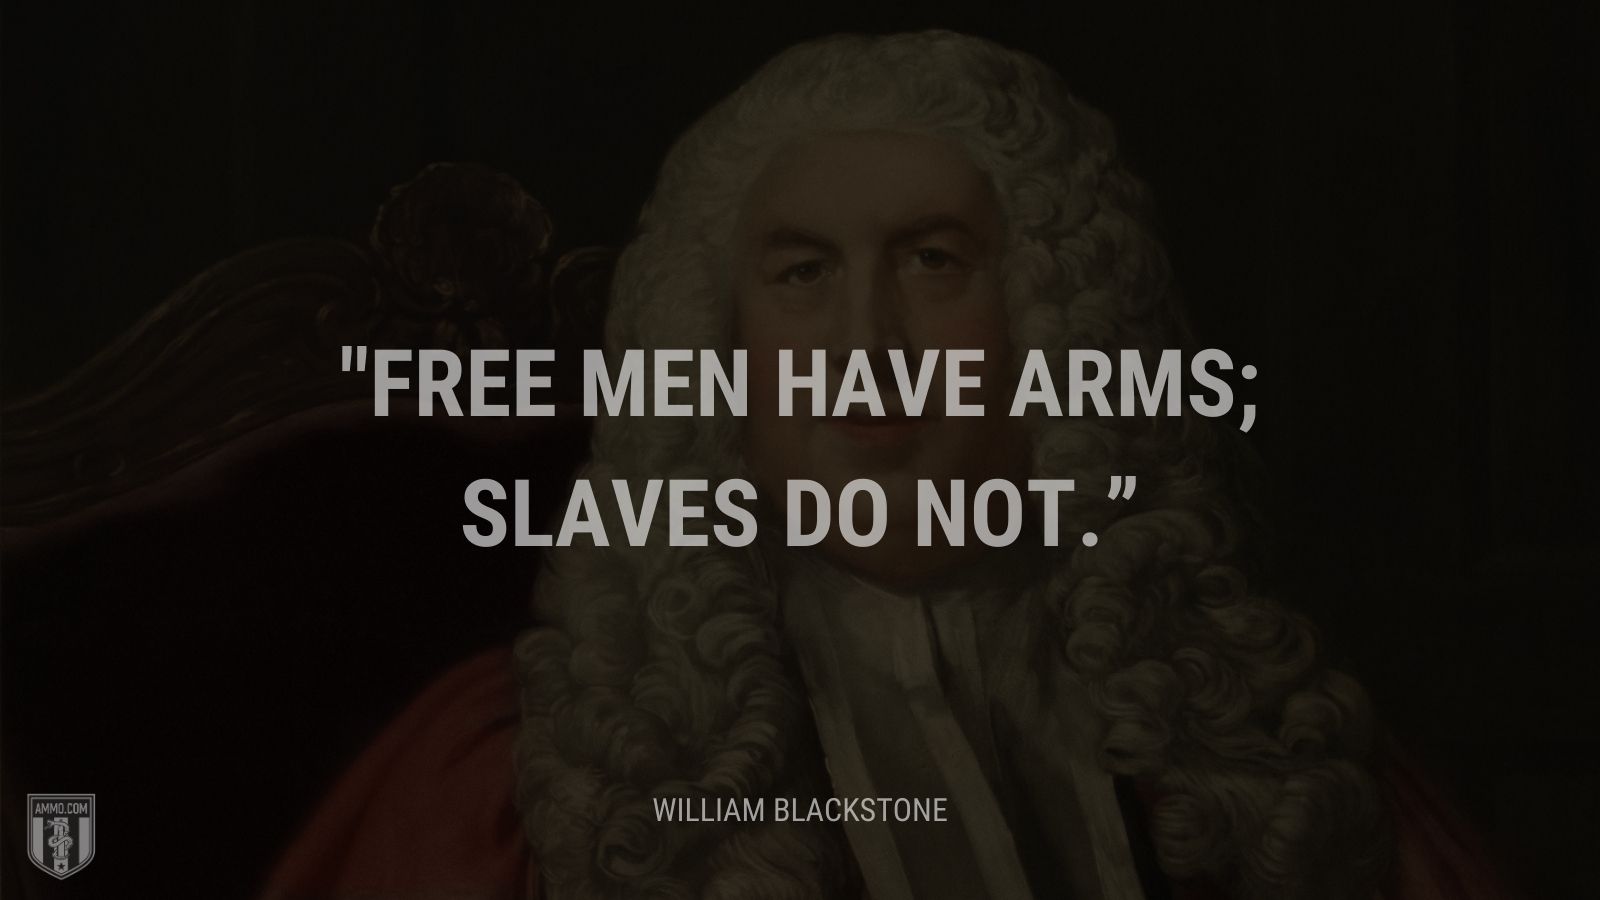 “Free men have arms; slaves do not.” - William Blackstone